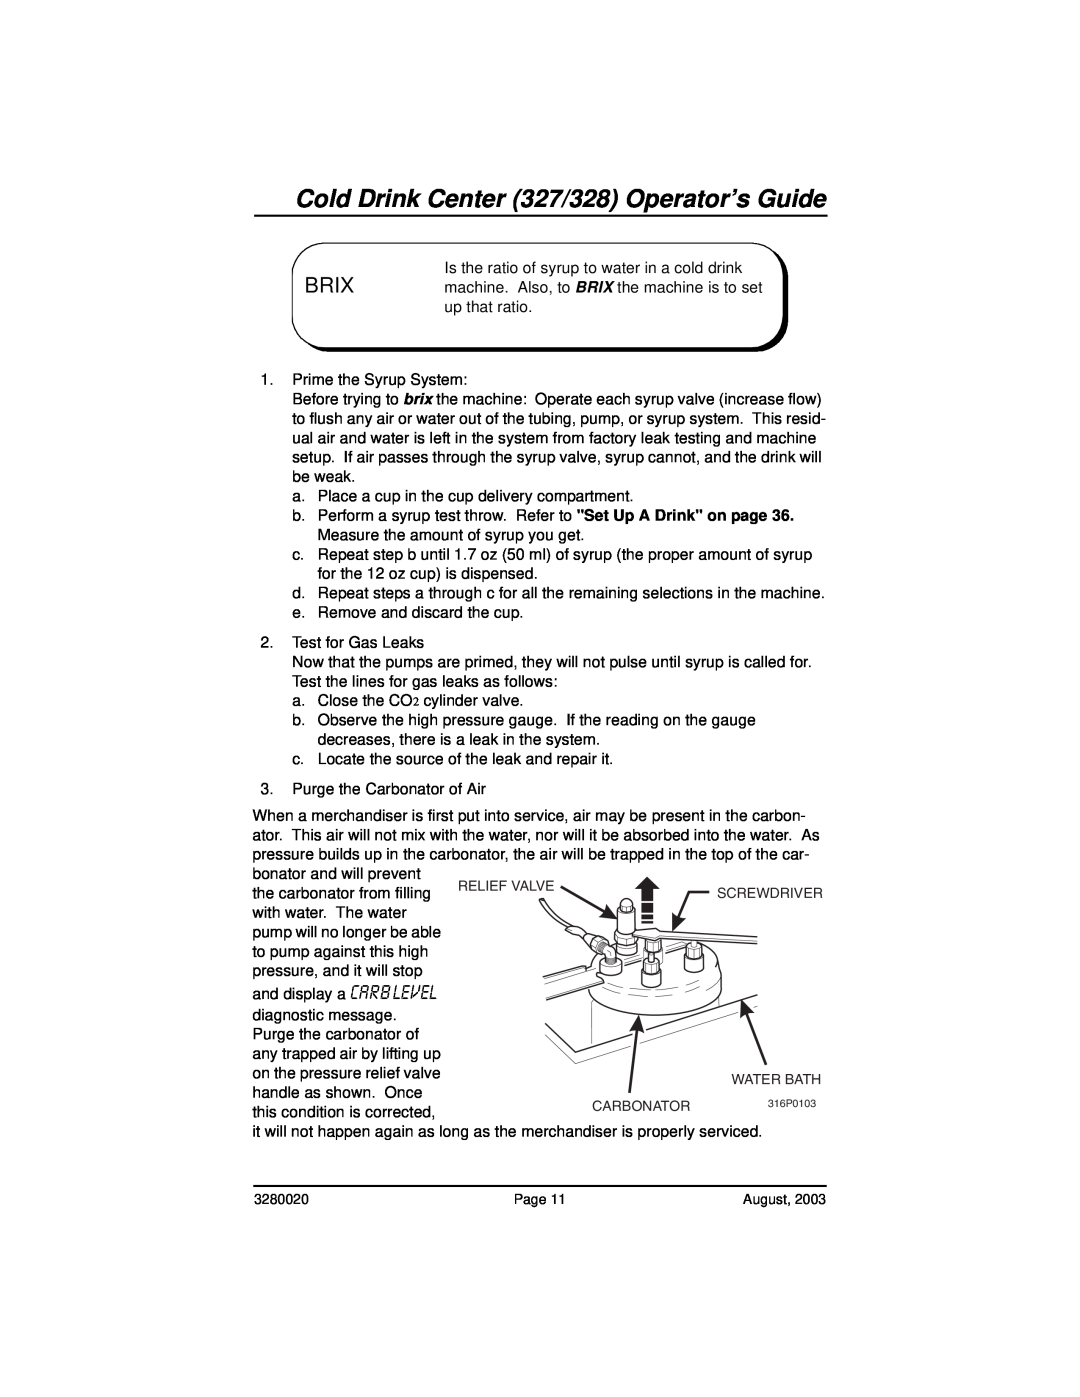 Everpure 325 manual ` o =ibsbi, Brix, Cold Drink Center 327/328 Operator’s Guide 